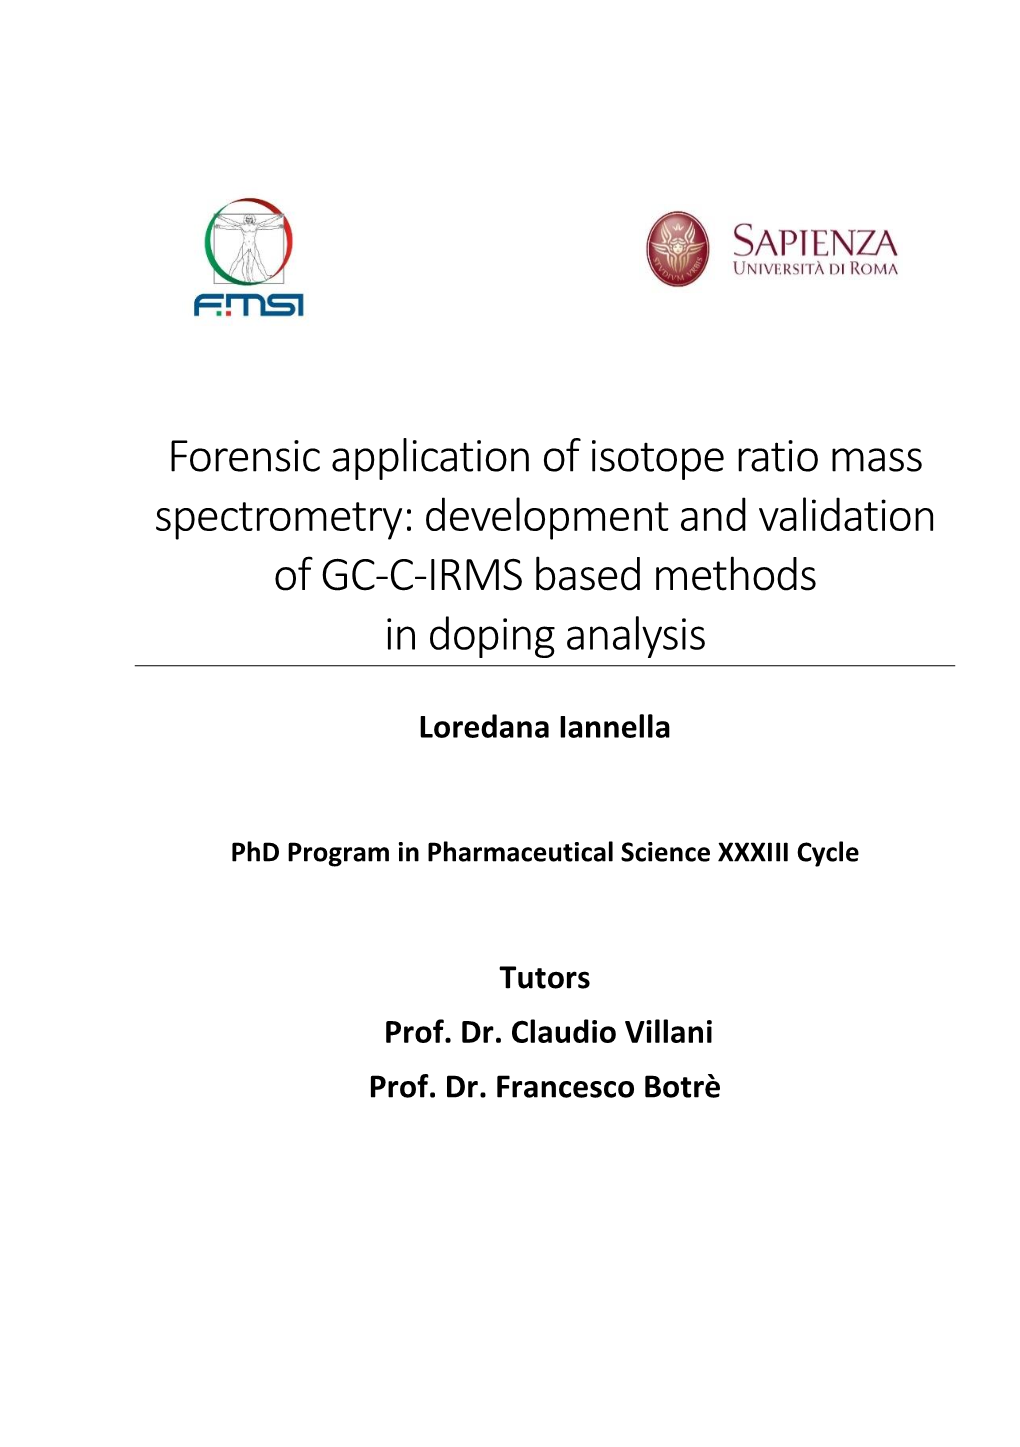 Forensic Application of Isotope Ratio Mass Spectrometry: Development and Validation of GC-C-IRMS Based Methods in Doping Analysis